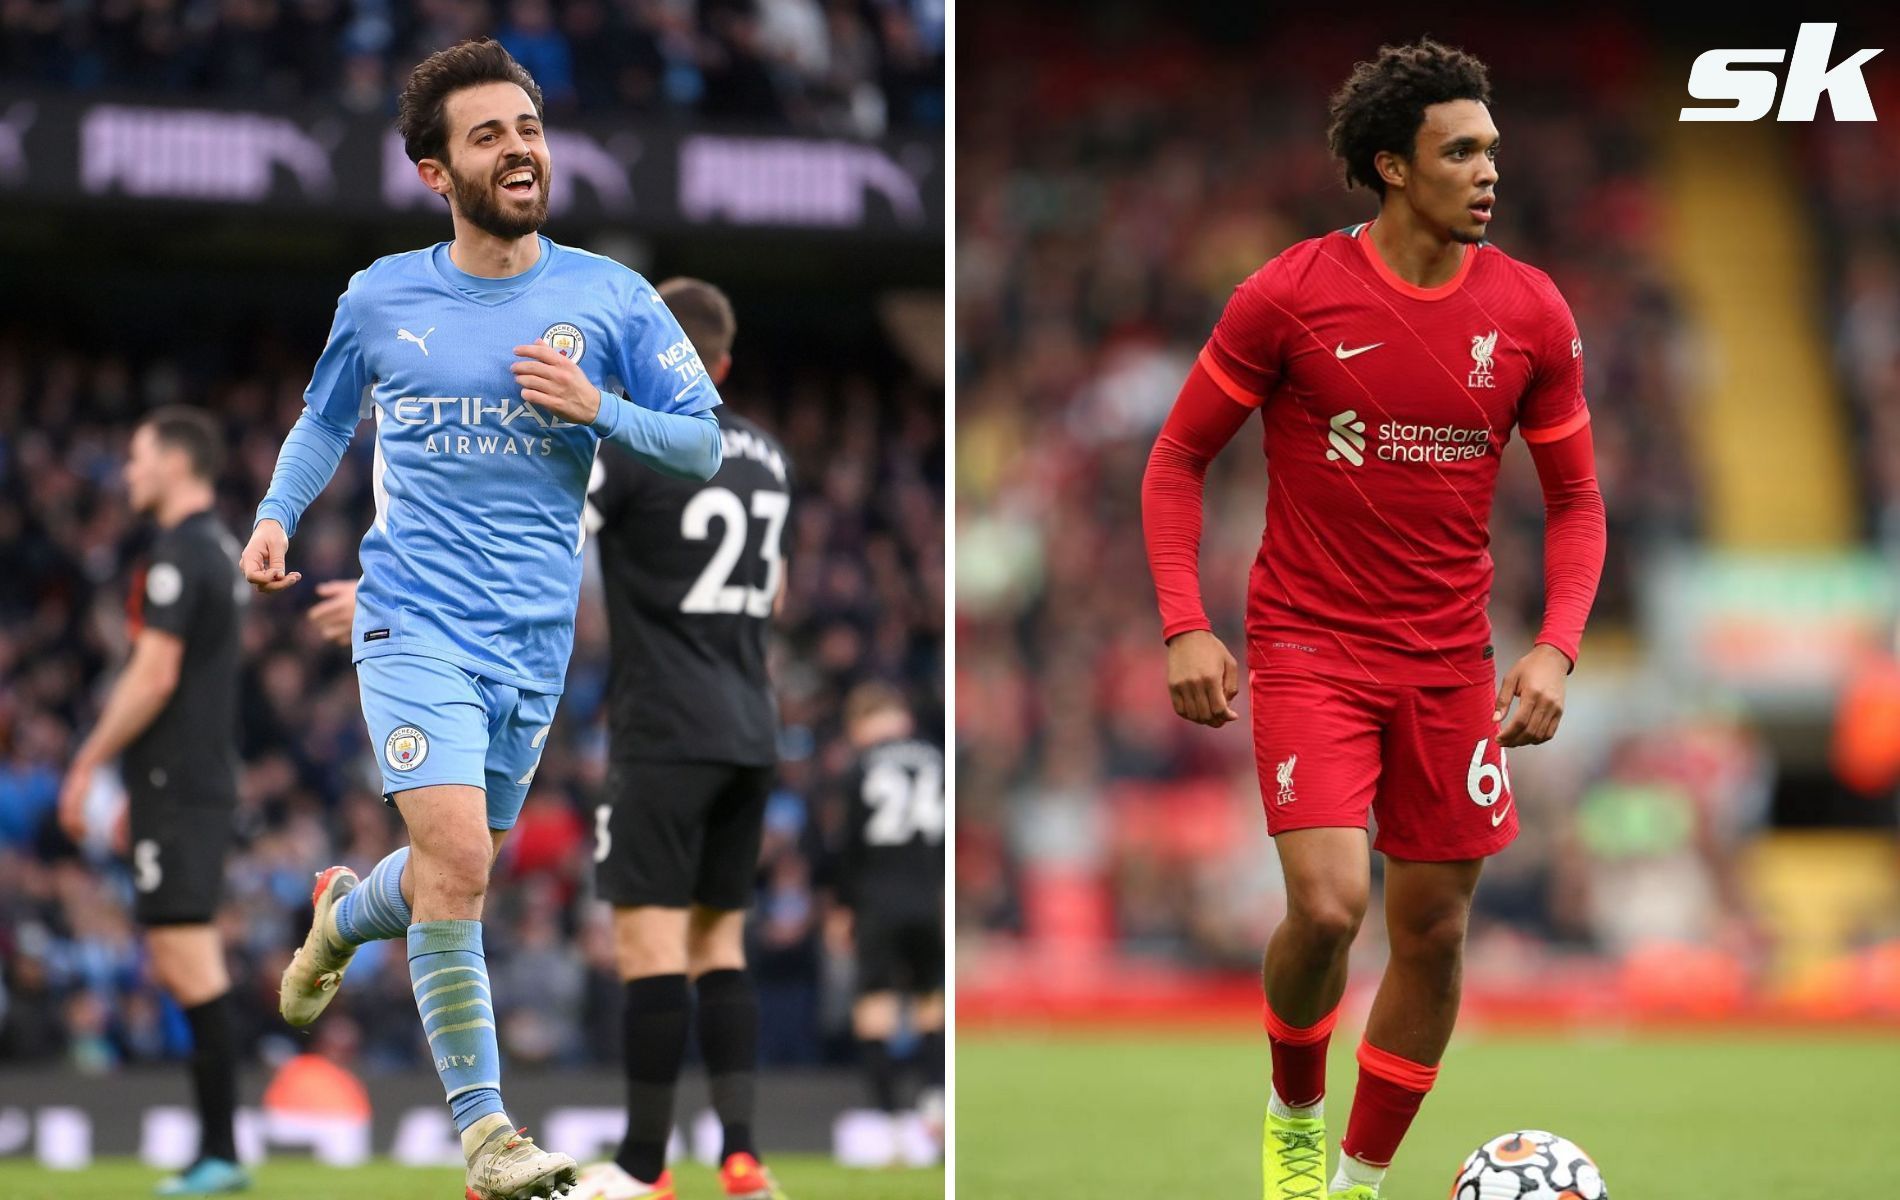 Who will be named as the player of the month for November?